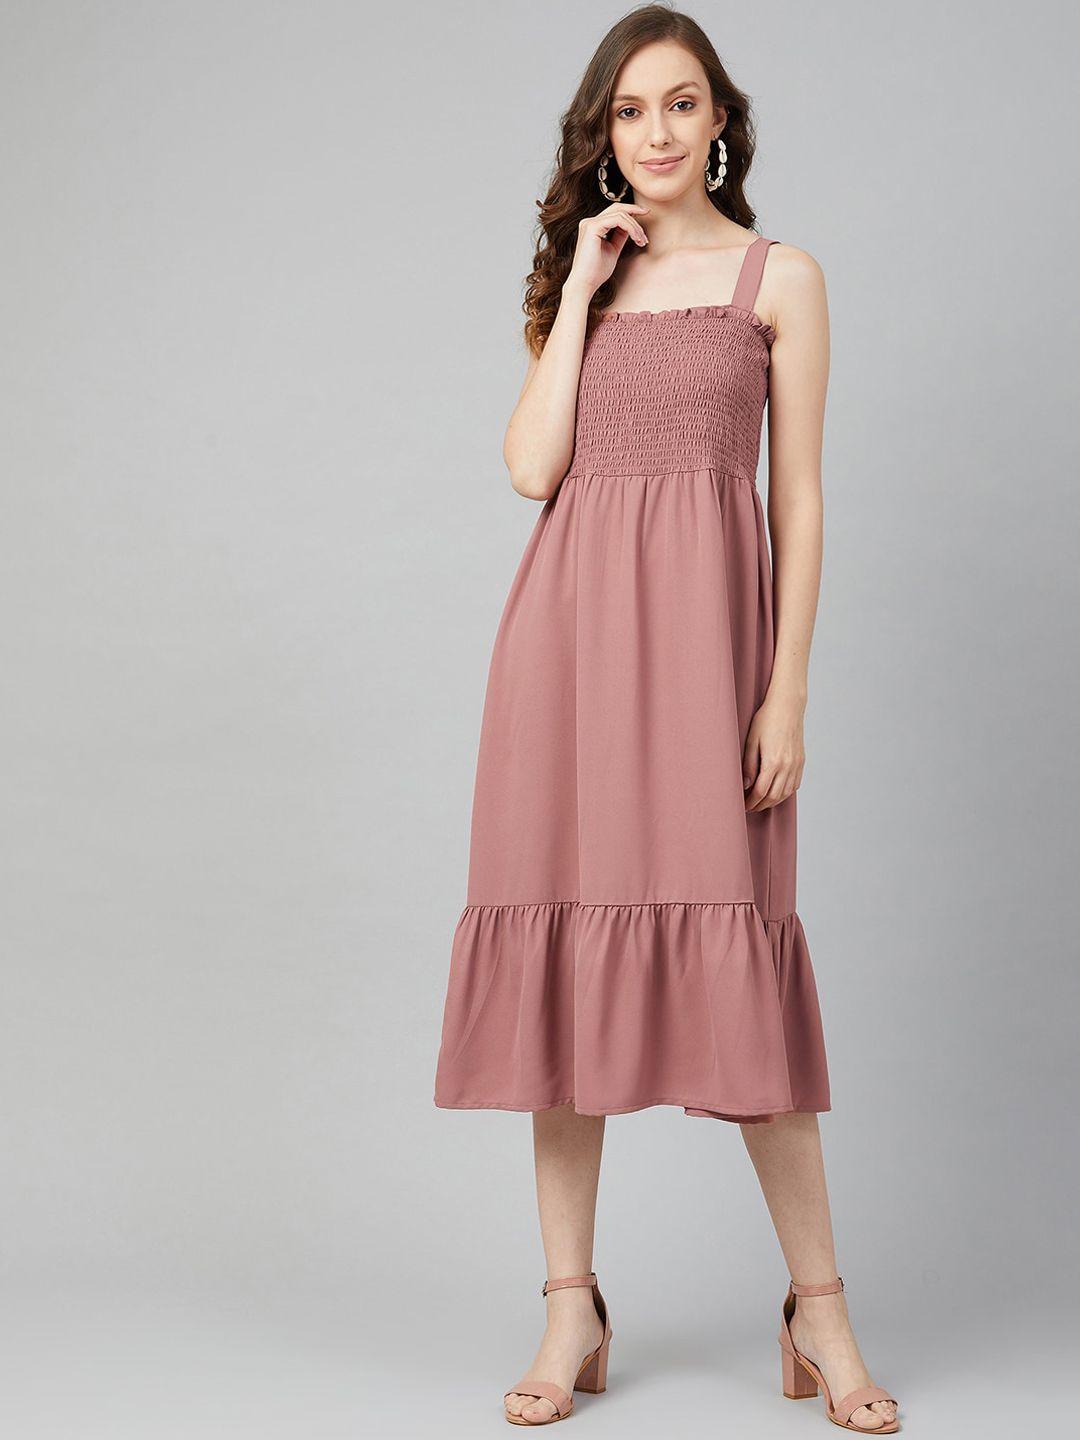 marie-claire-women-peach-coloured-solid-a-line-dress